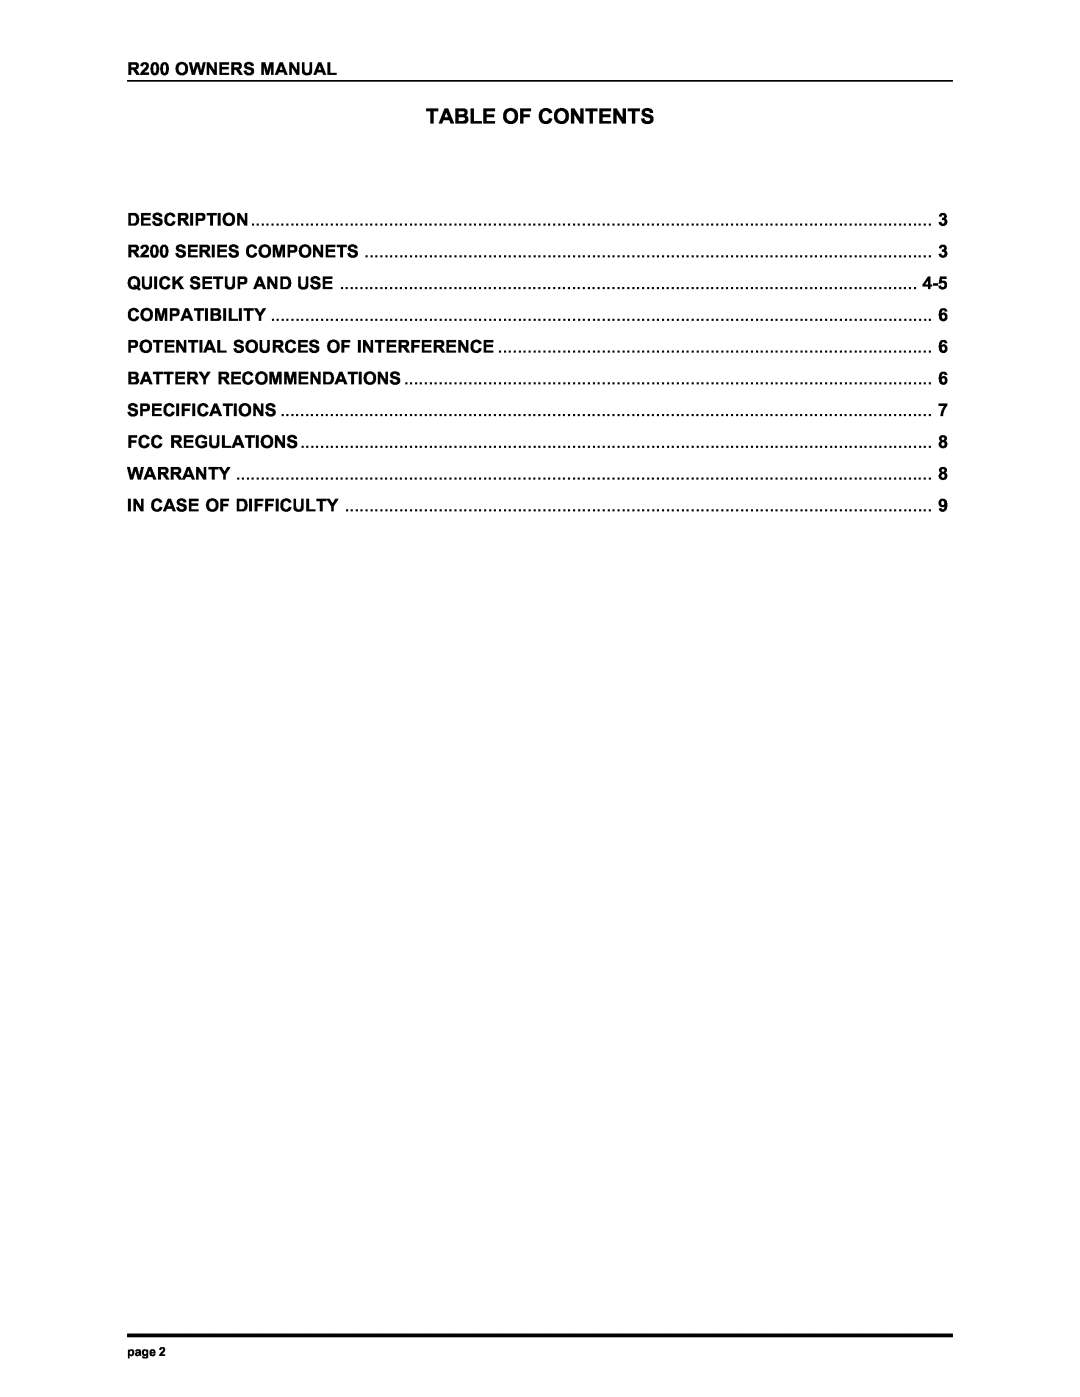 Electro-Voice R200 manual Table Of Contents 